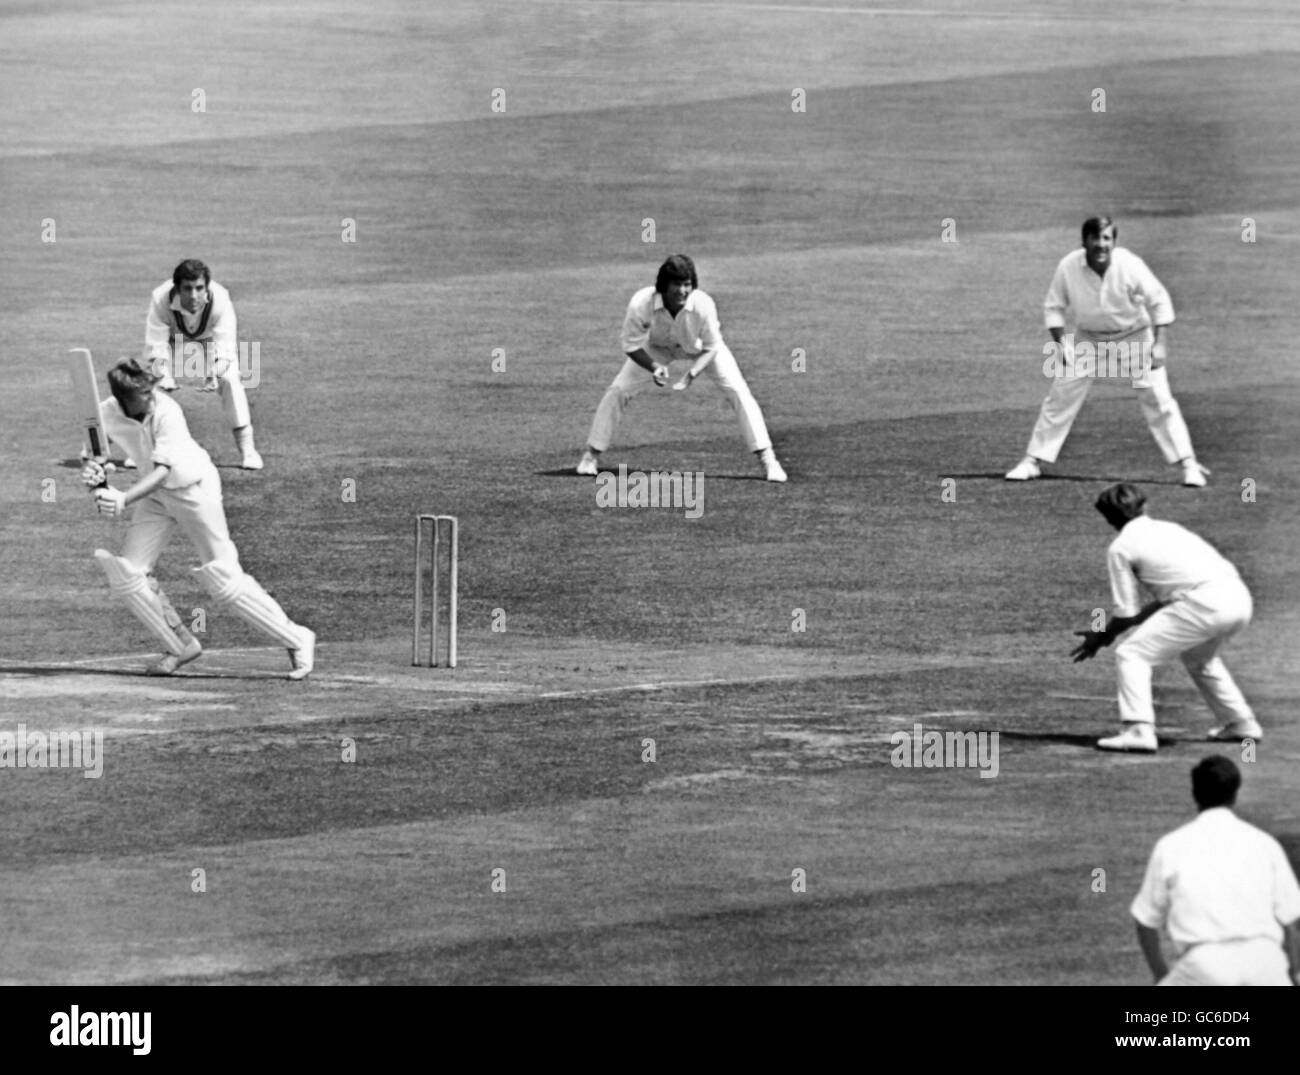 - County Cricket Championships 1971 - Día uno: Middlesex v Hampshire - Lord's Cricket Ground Foto de stock